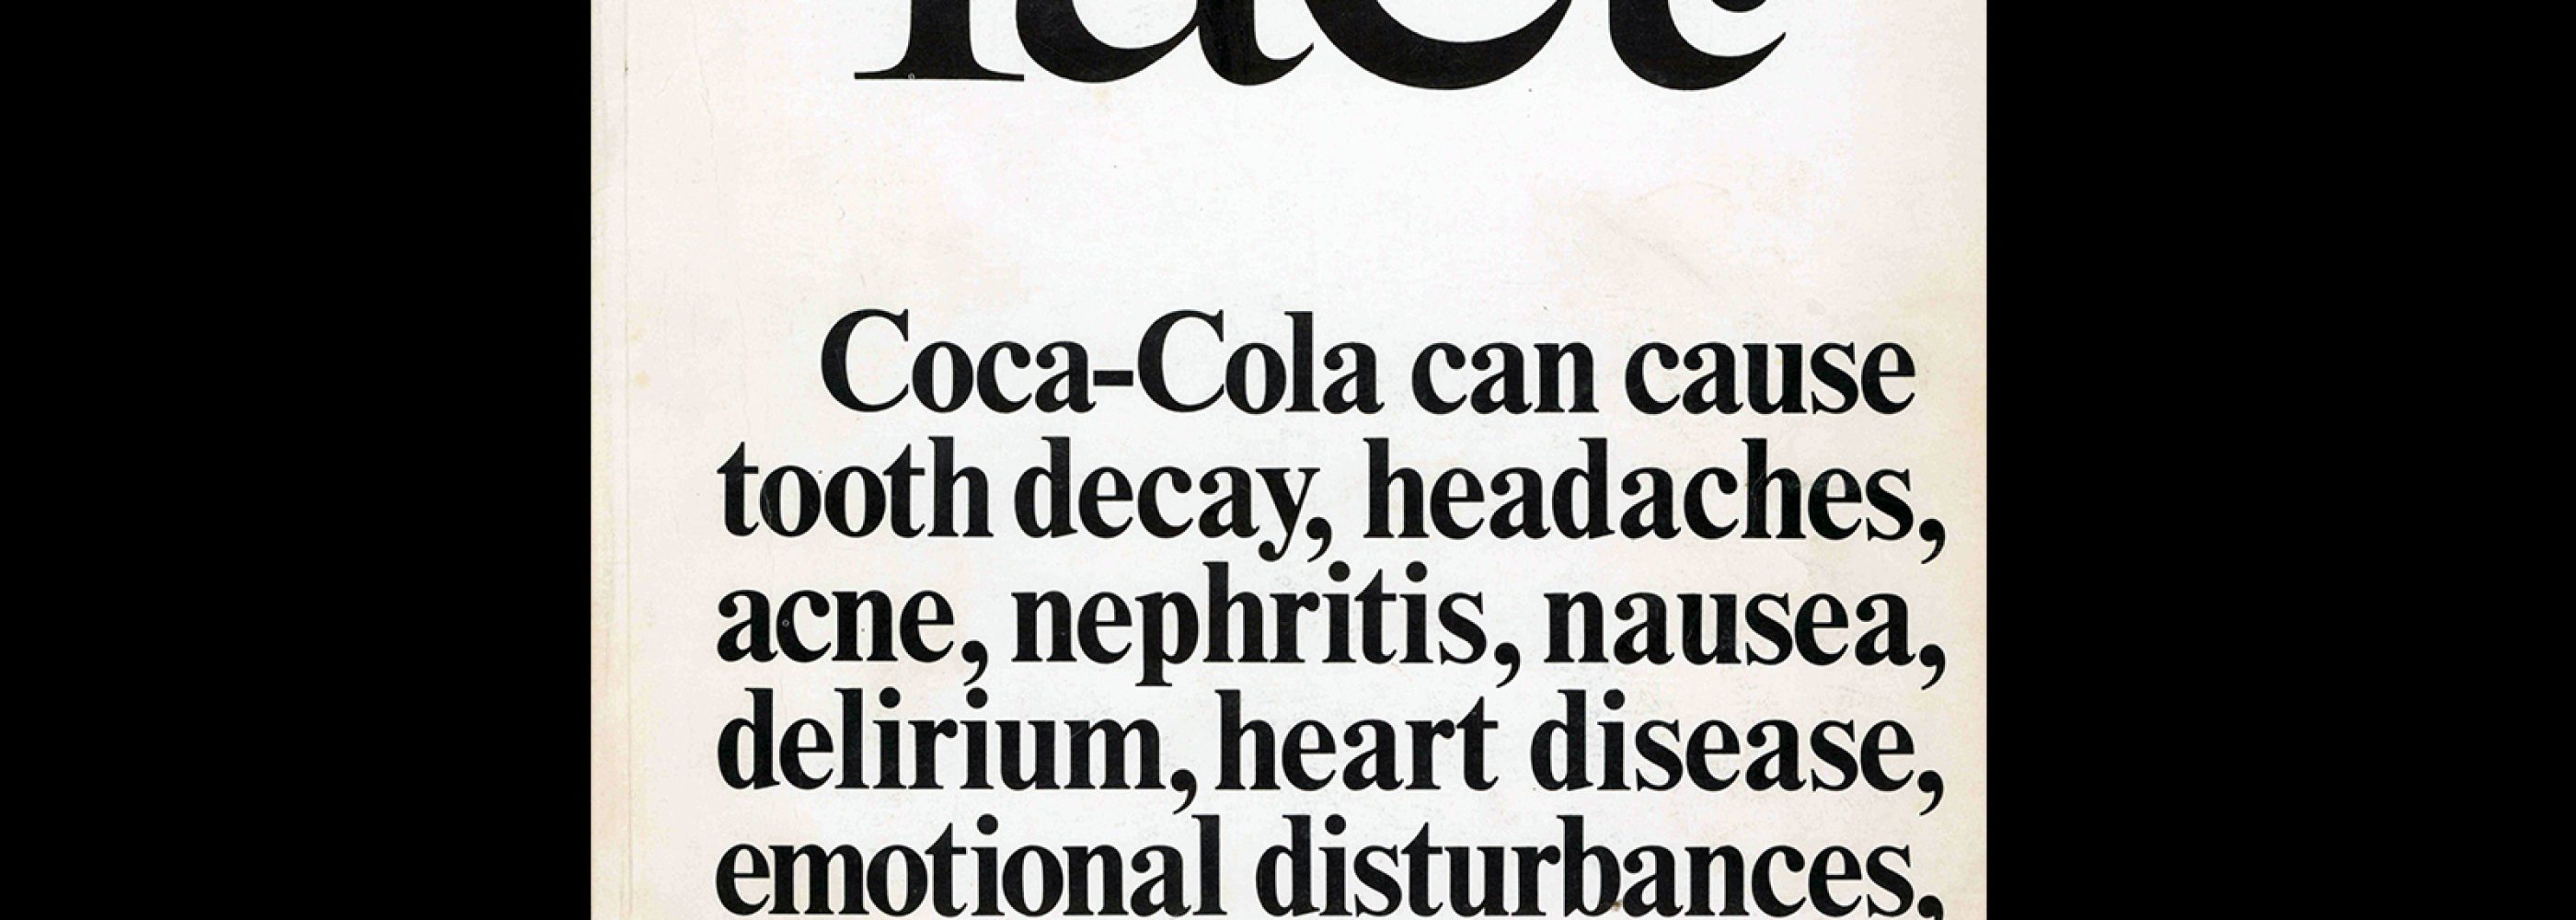 Fact, Volume One, Issue Six, 1964. Designed by Herb Lubalin